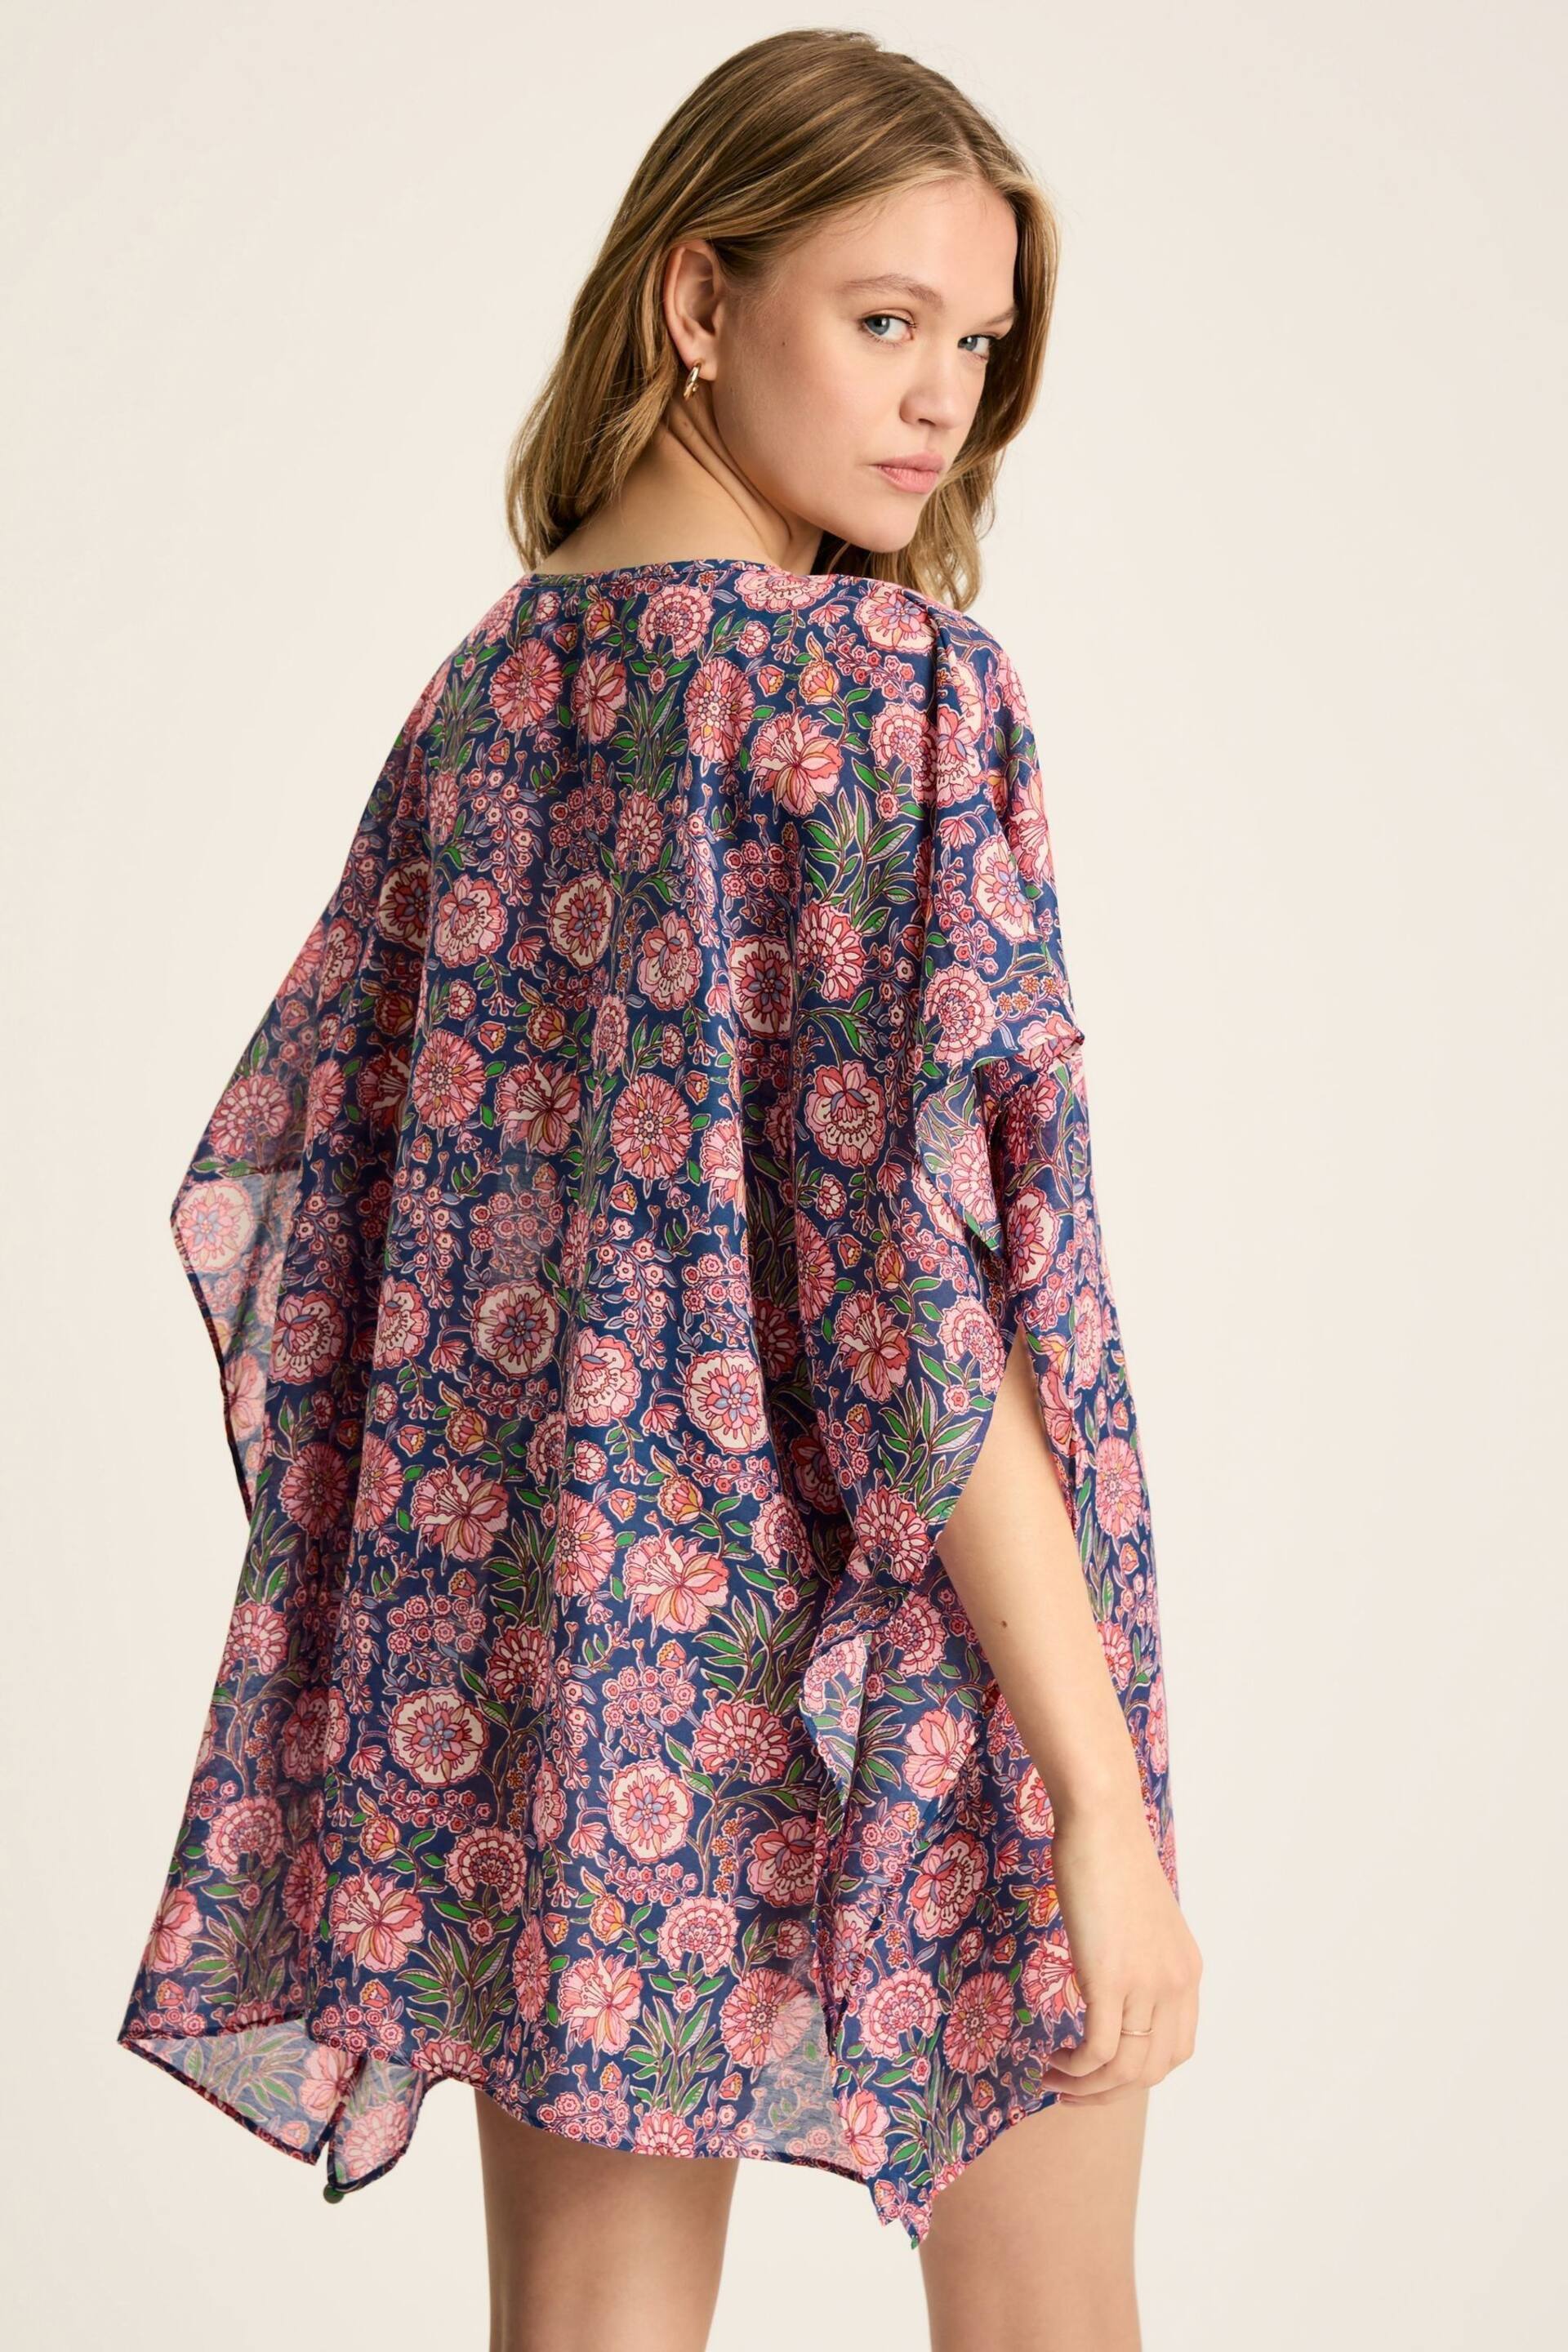 Joules Rosanna Multi Beach Cover-Up - Image 2 of 7